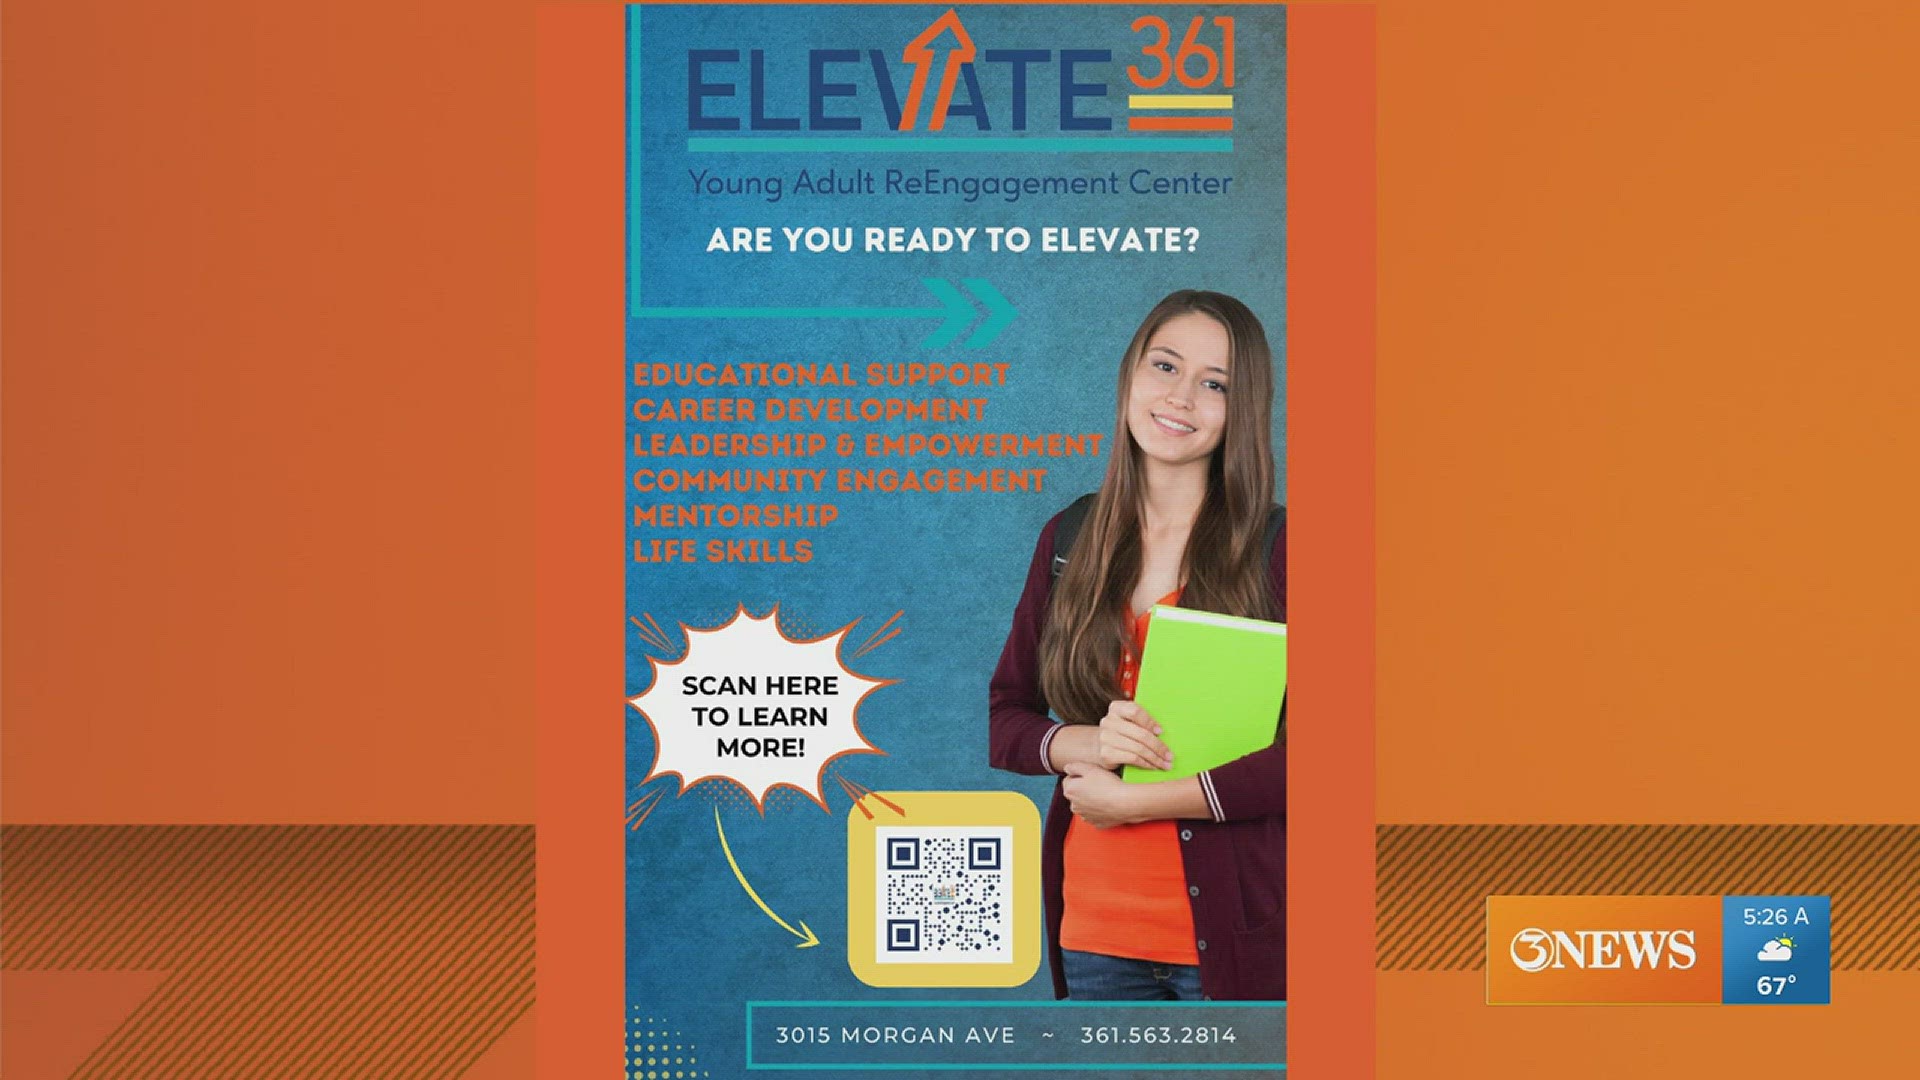 Elevate 361 has a new facility open on 3015 Morgan Ave. to help young adults age 16-24 get a leg up in life.